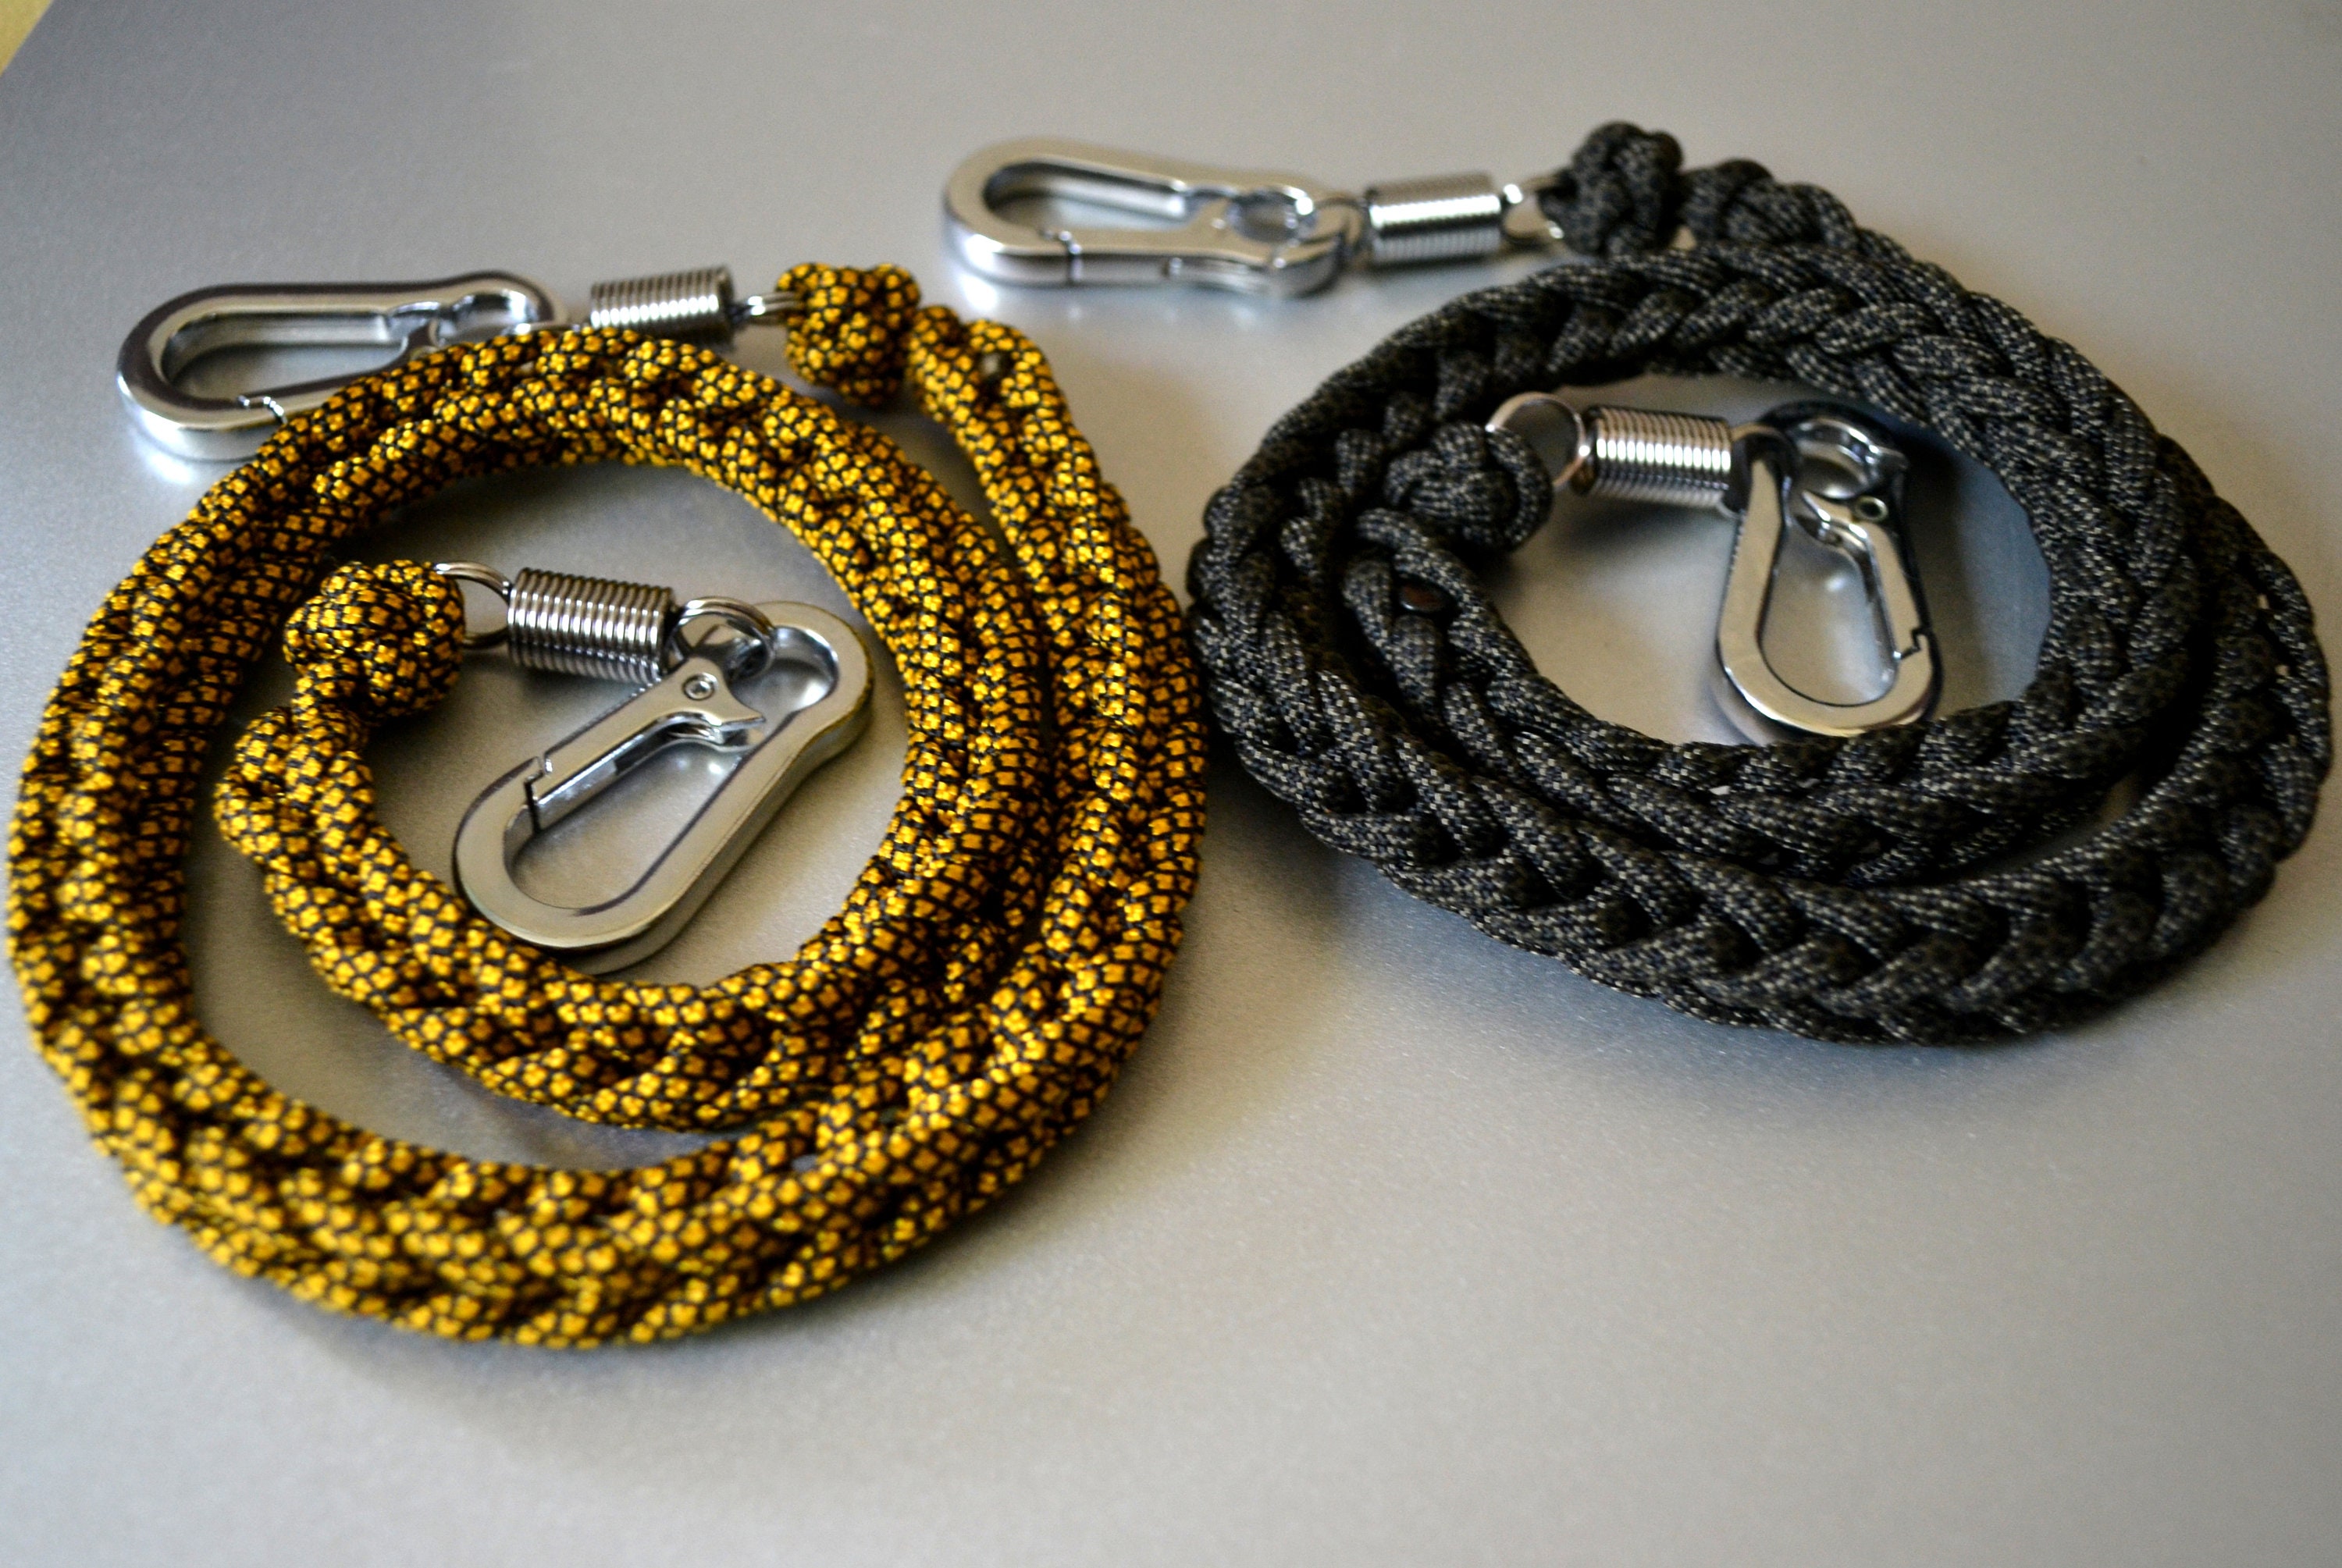 REHTAEL Paracord Keychain with Carabiner- Military Braided Paracord Carabiner Keychain Clip with Strap for Keys/Men/Women